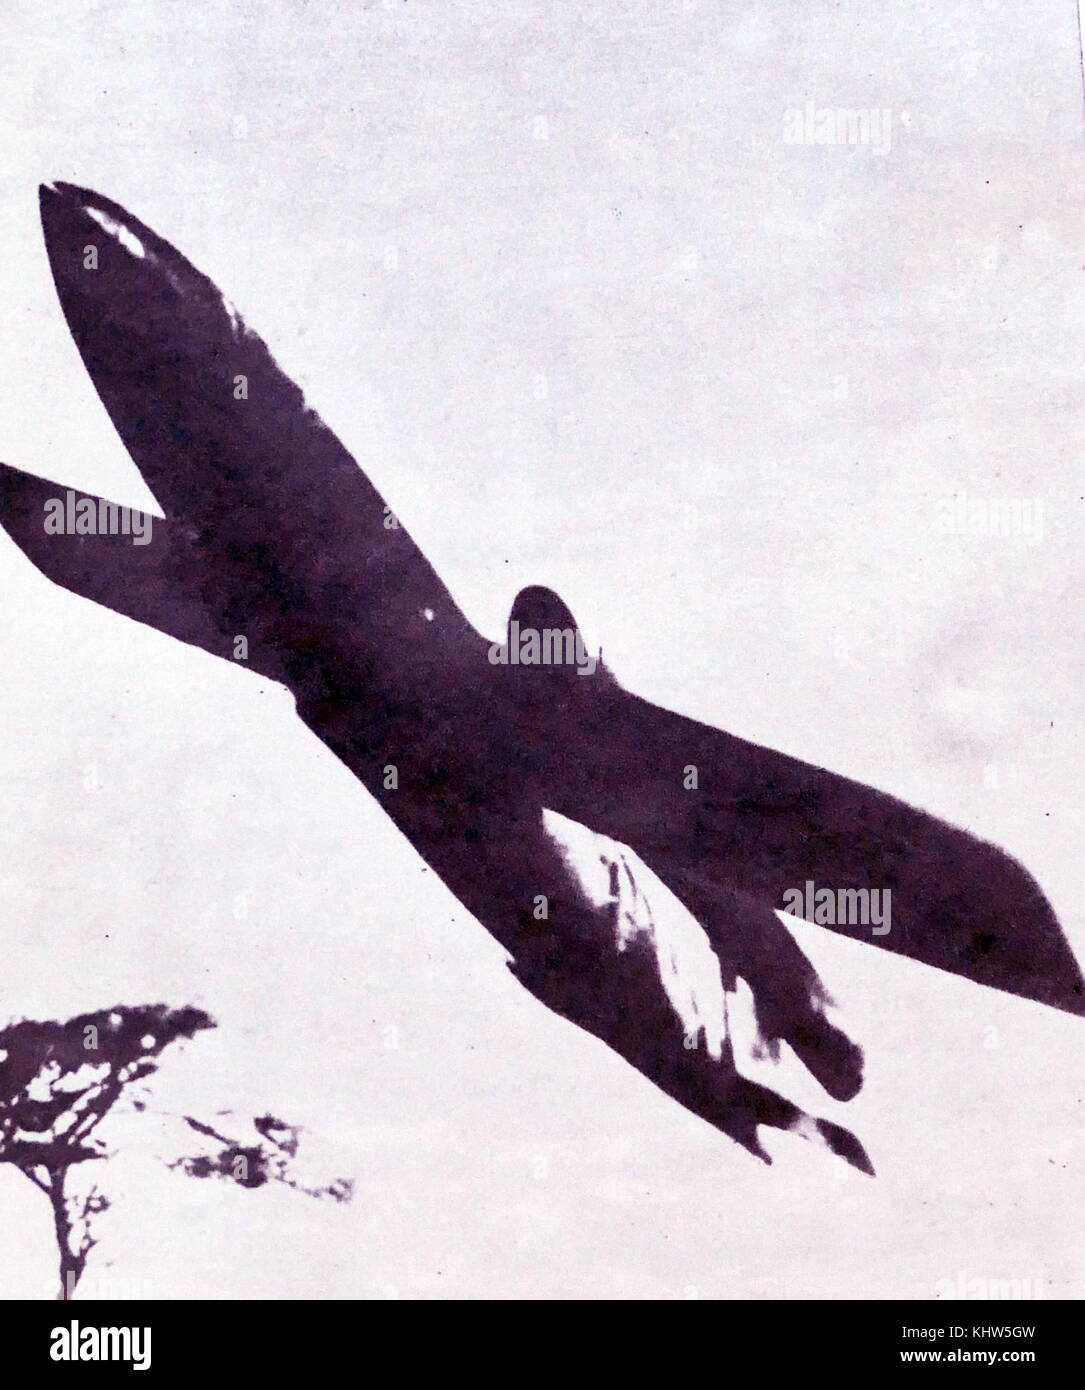 Photograph of a V-1 flying bomb, an early cruise missile and the only production aircraft to use a pulsejet for power. Dated 20th Century Stock Photo